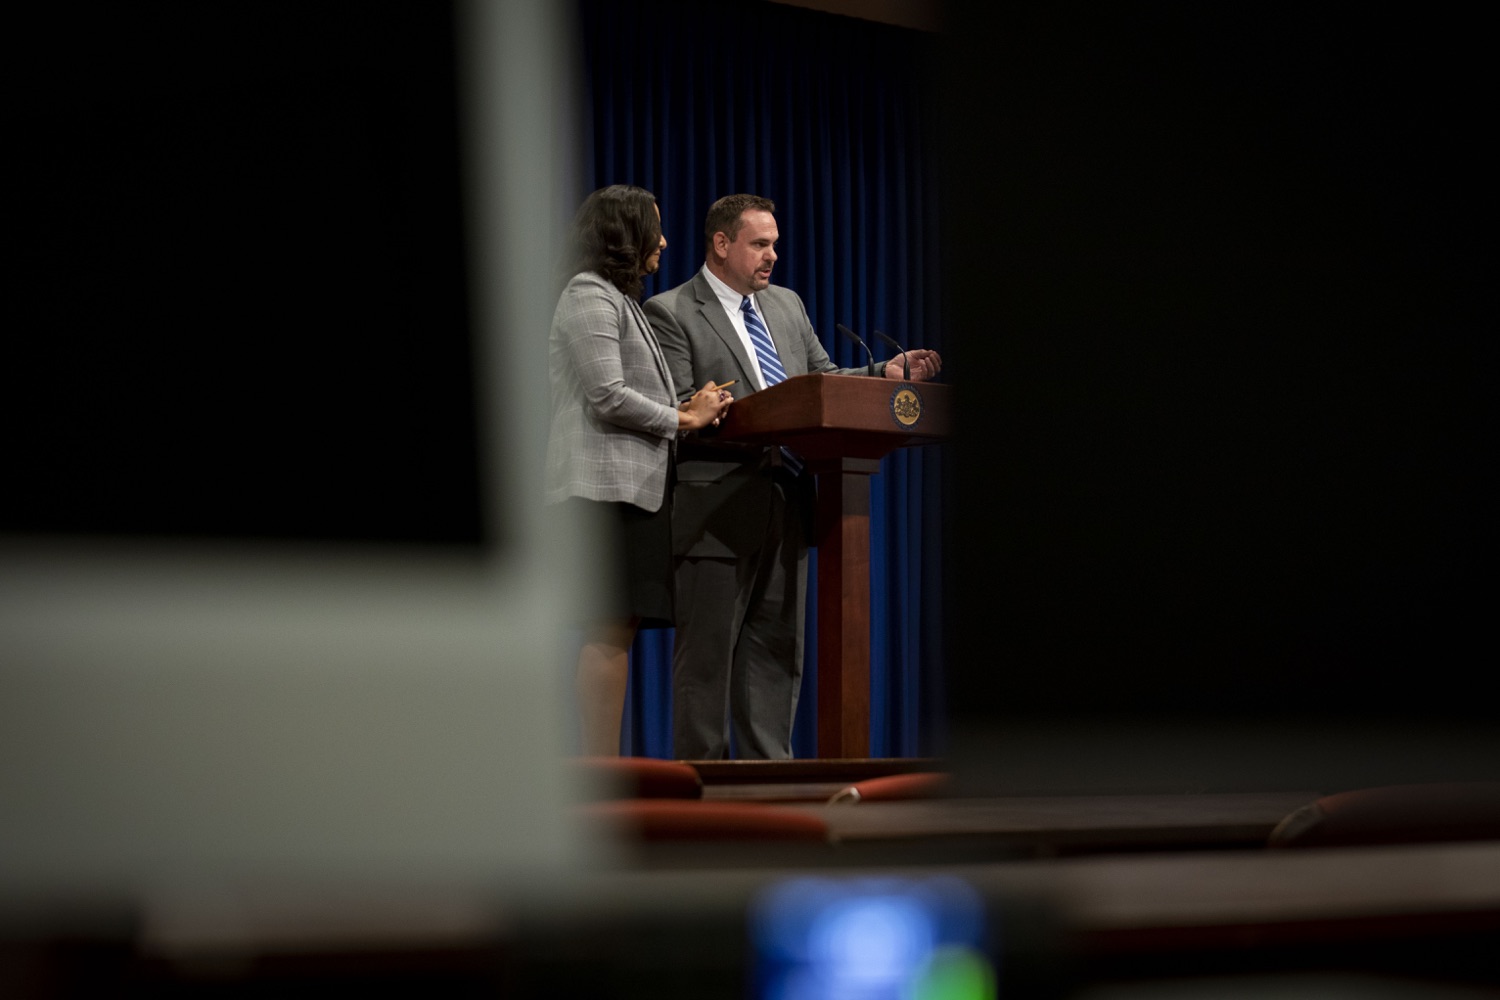 Deputy Secretary for Elections and Commissions Jonathan Marks and Acting Secretary of State Leigh M. Chapman answer questions from the media about the statewide recount of the U.S. Senate race, in Harrisburg, PA on May 25, 2022.<br><a href="https://filesource.amperwave.net/commonwealthofpa/photo/20885_dos_recount_08.jpg" target="_blank">⇣ Download Photo</a>